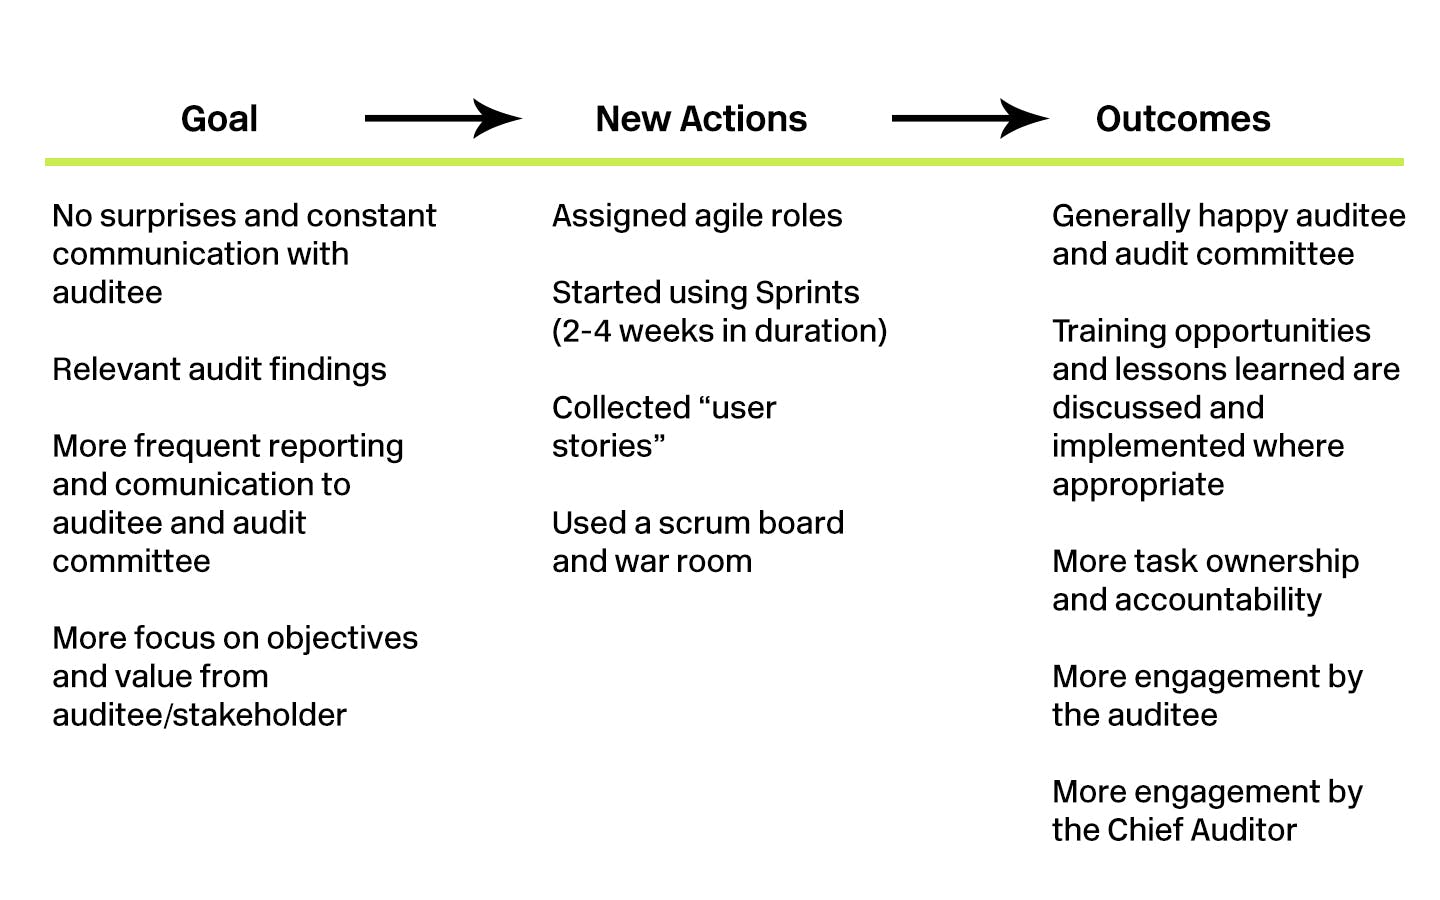 Goal, new actions and outcomes of agile internal audit